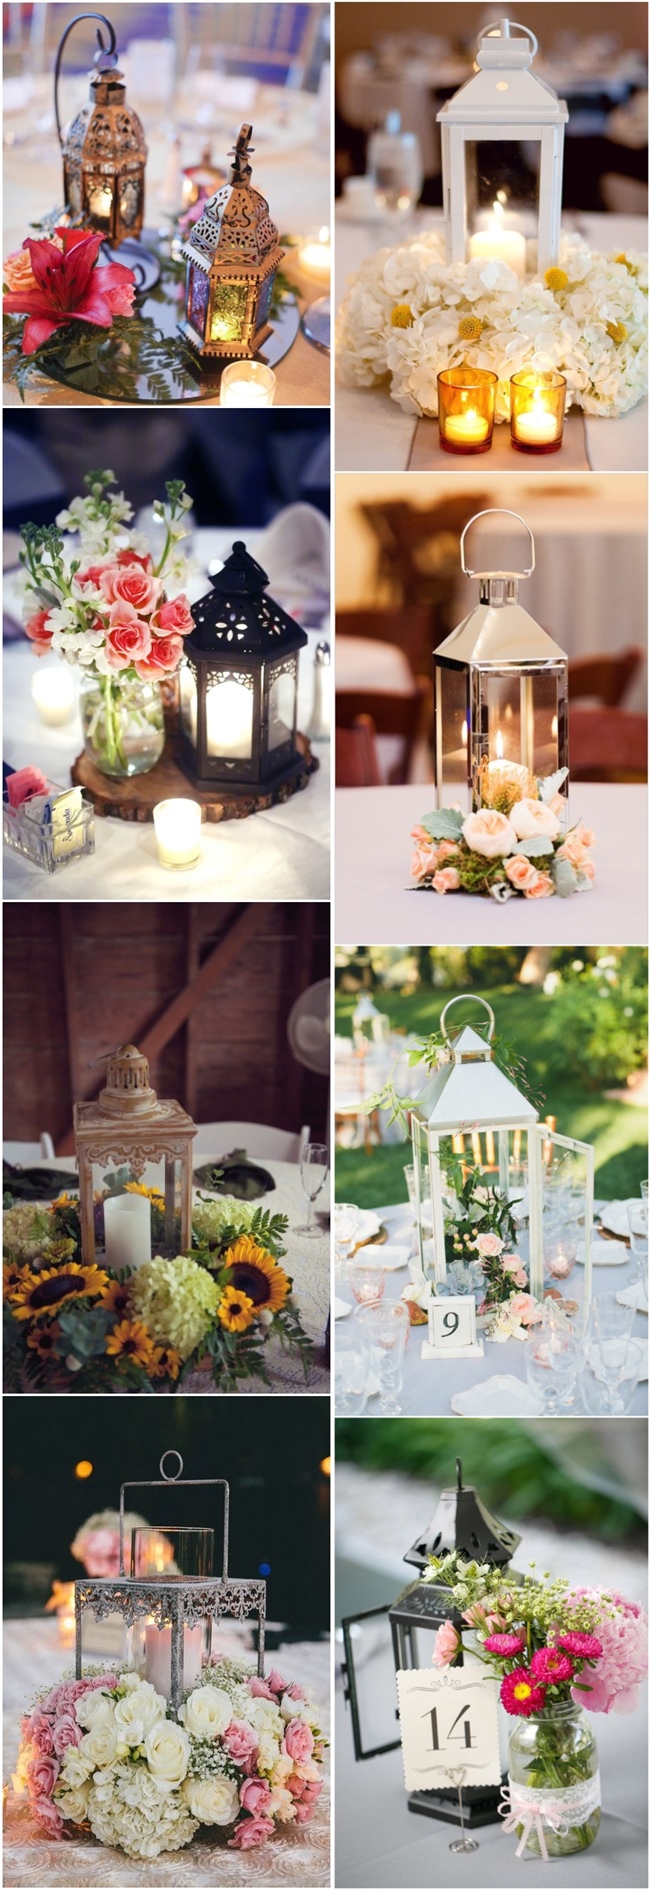 35 Lantern Wedding Centerpieces For Every Couple And Style | atelier ...